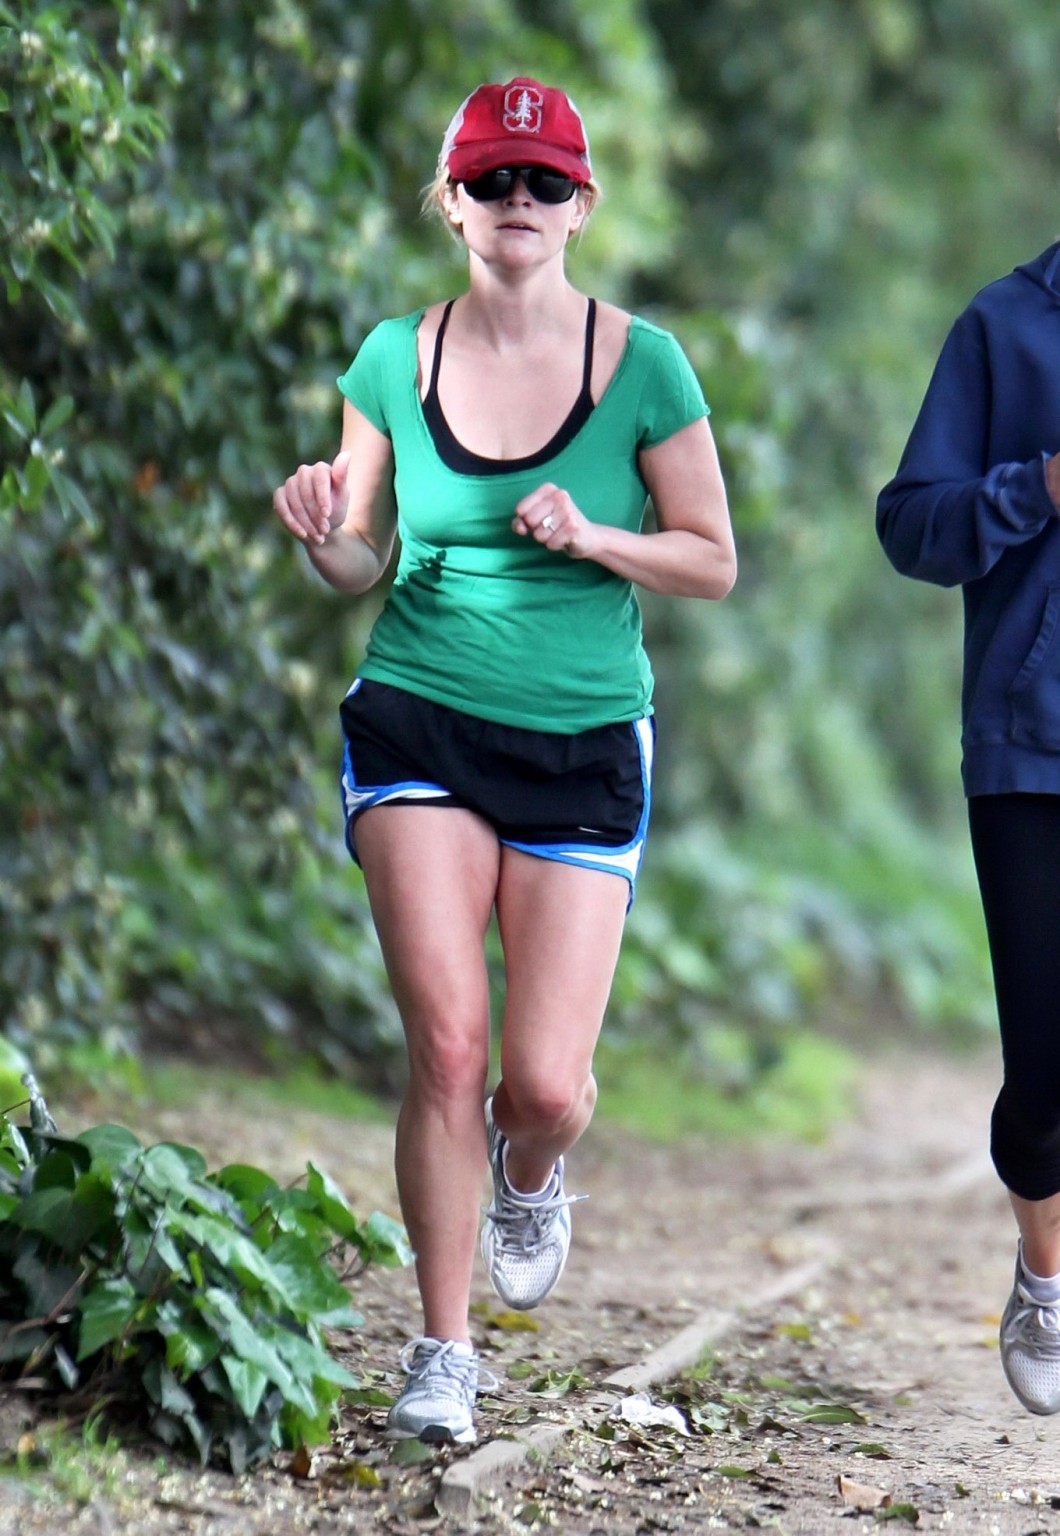 Reese Witherspoon langbeinig in Shorts beim Joggen in Brentwood
 #75312880